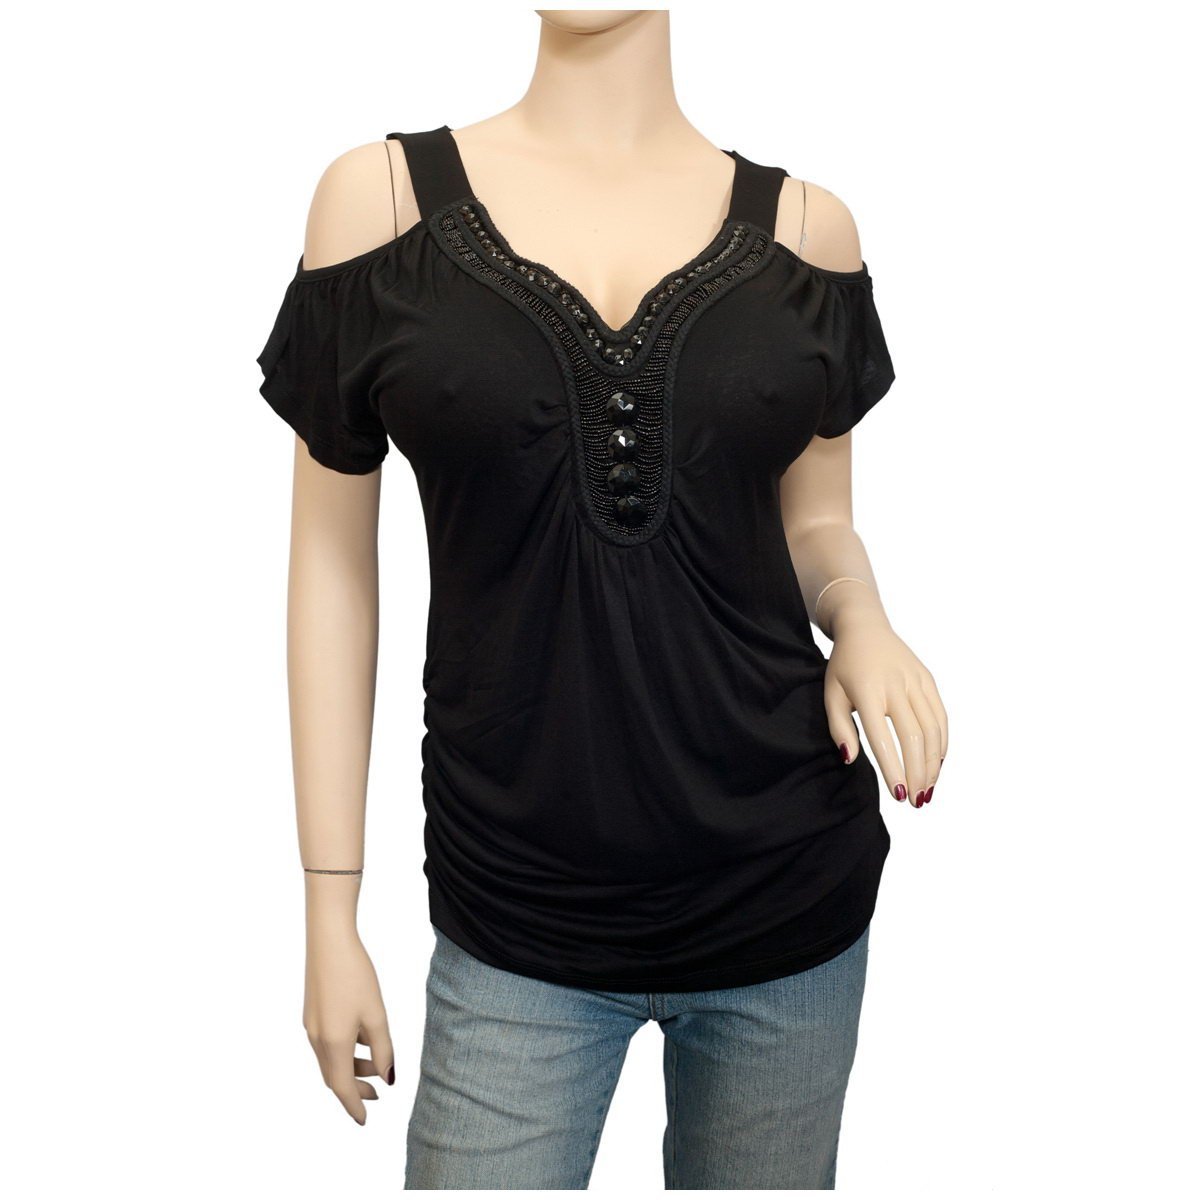 Sexy Plus Size Womens Tops 37